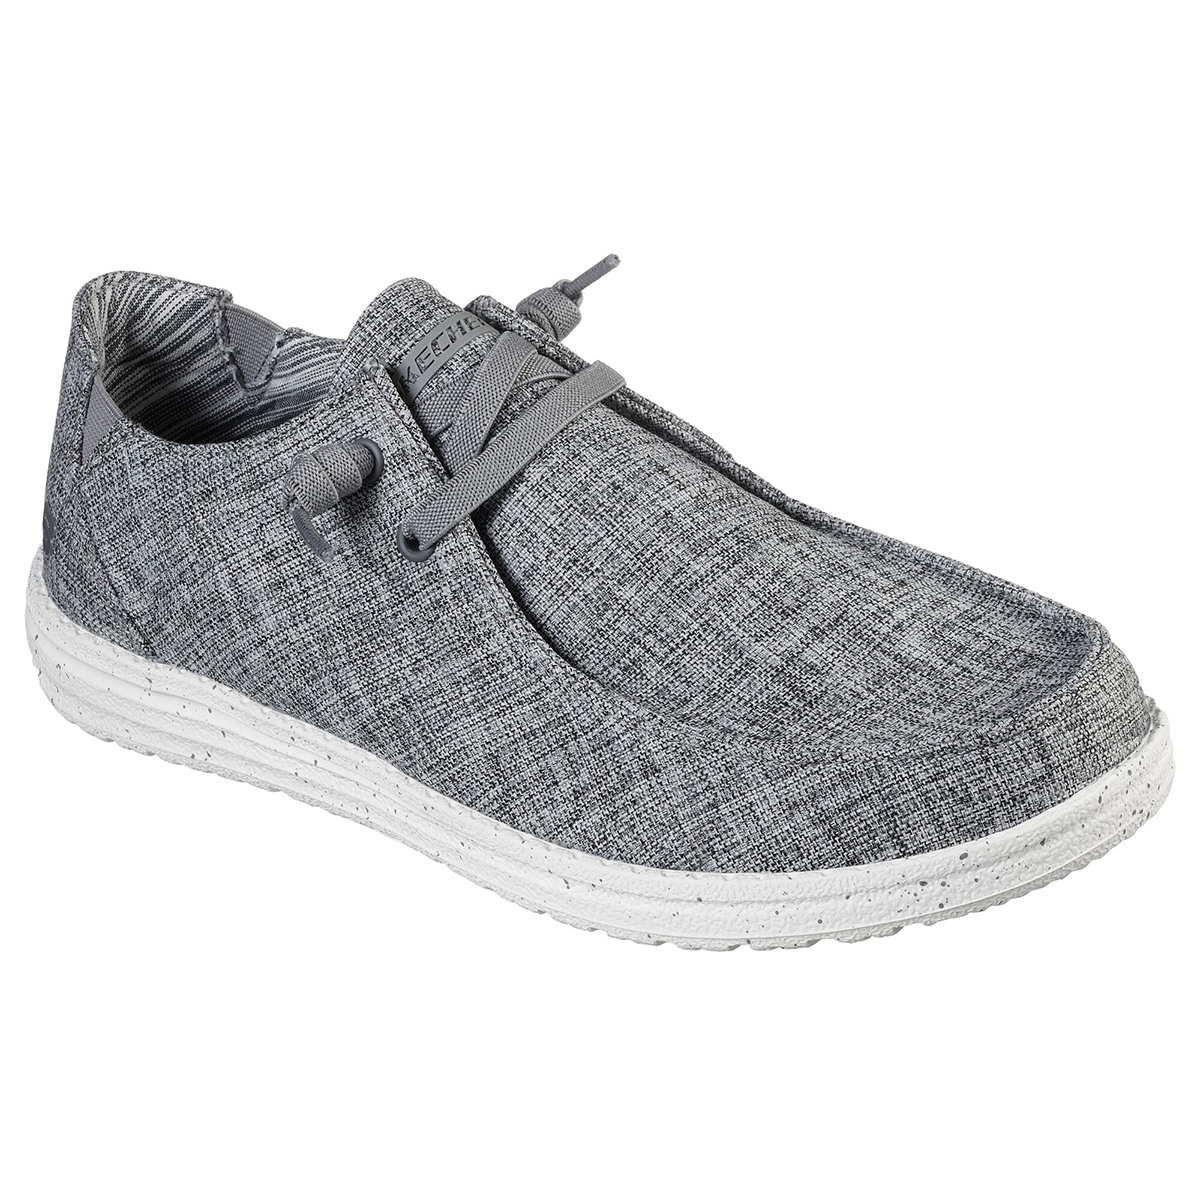 Skechers Men's Relaxed Fit: Melson - Chad Shoe